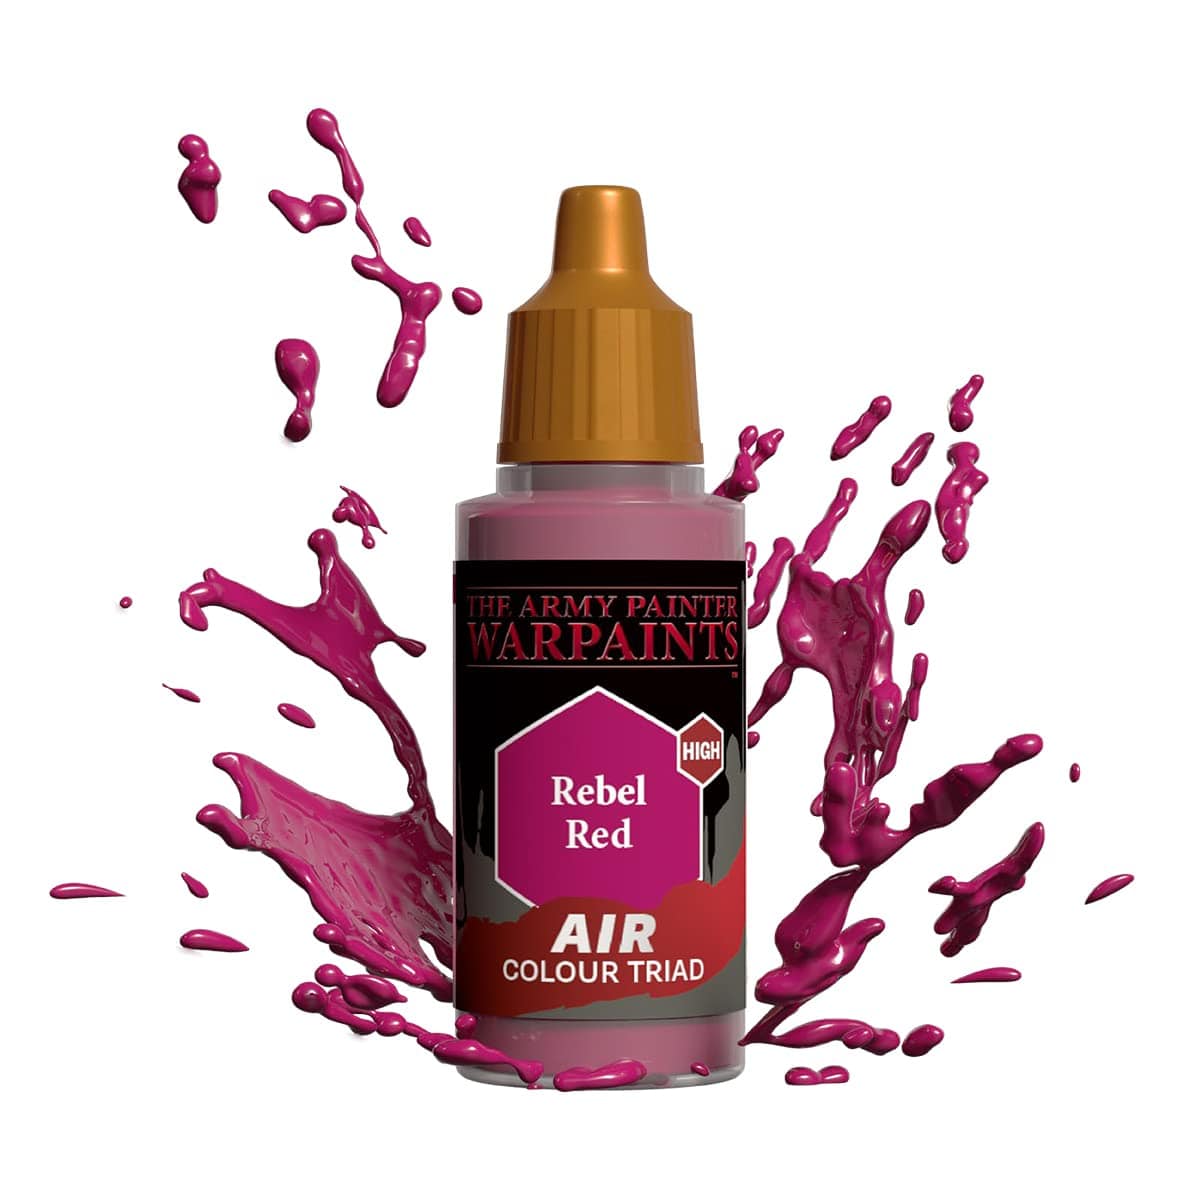 The Army Painter Accessories The Army Painter Warpaints Air: Rebel Red 18ml